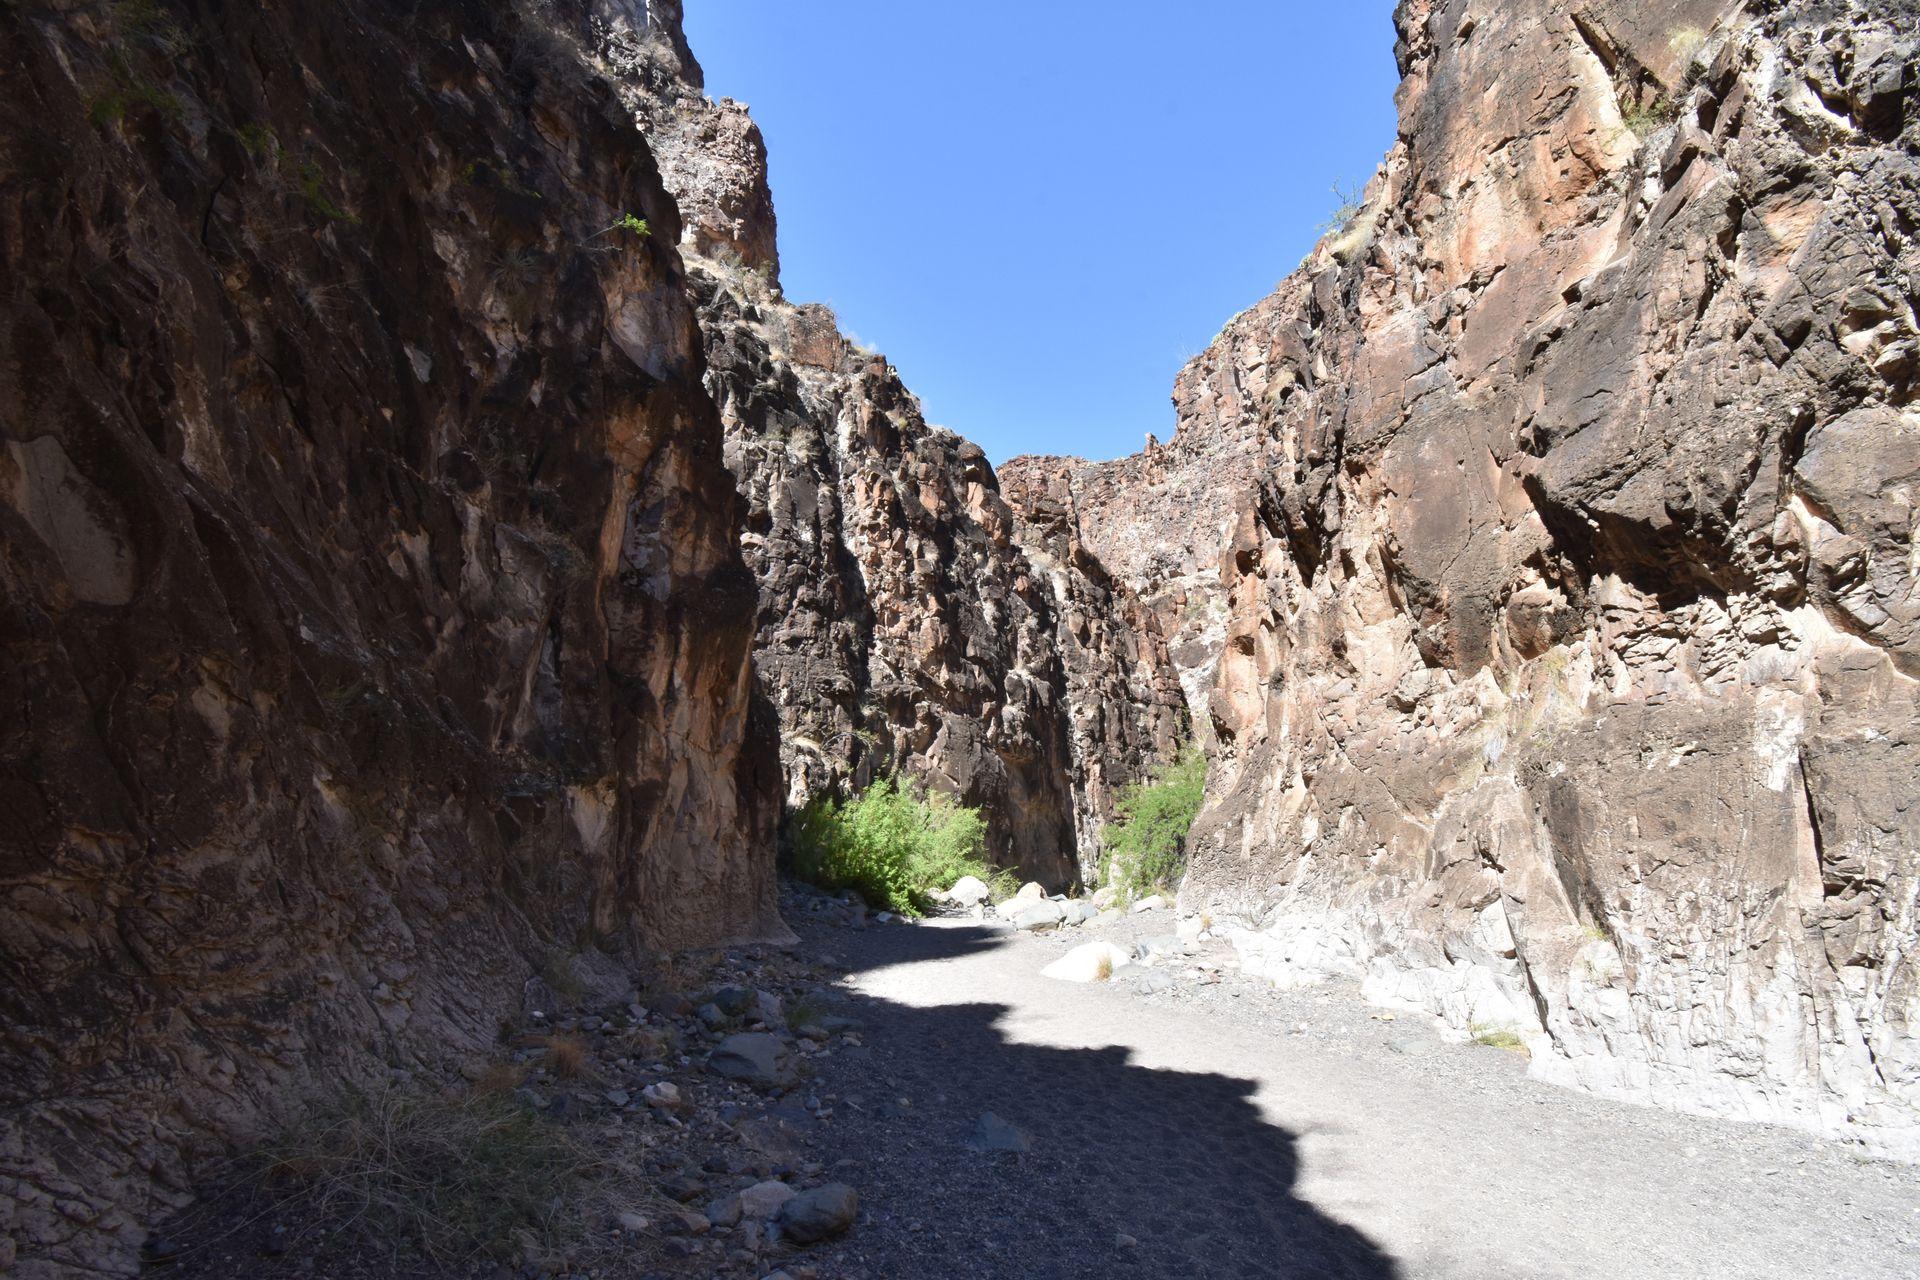 A wide trail with canyon walls towering up on each side.